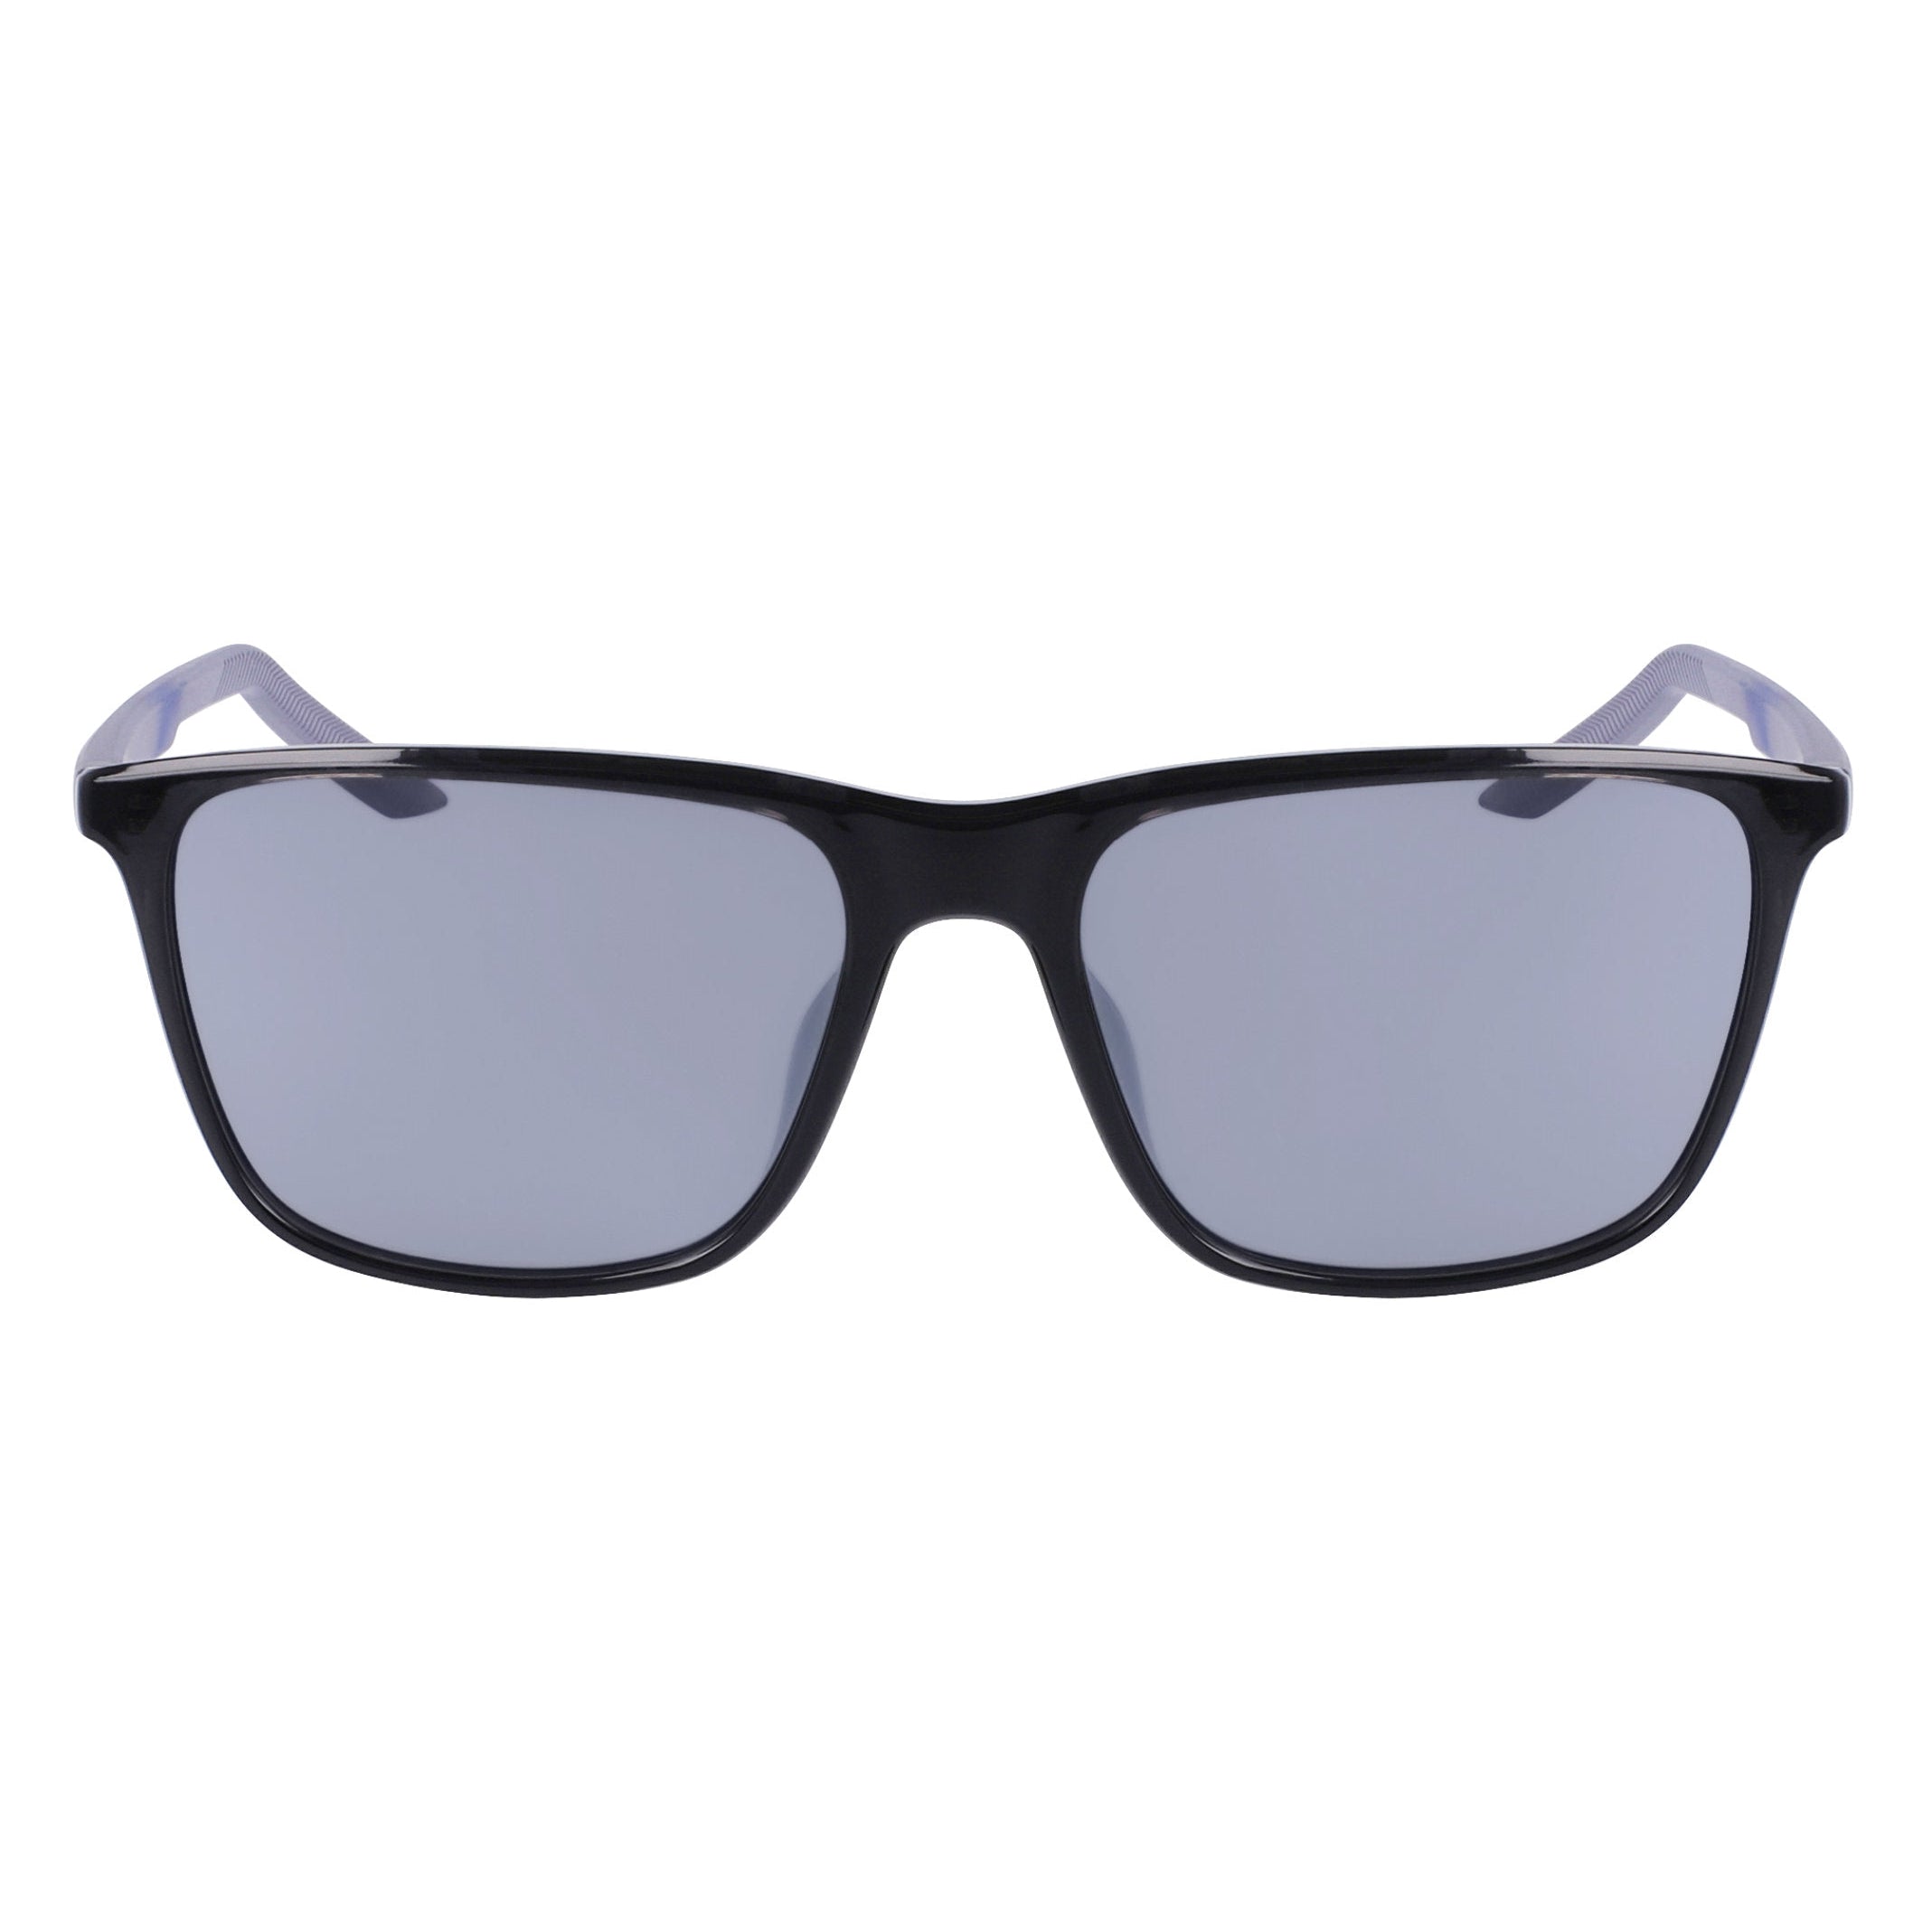 Nike Sunglasses State Anth/Silver Flash